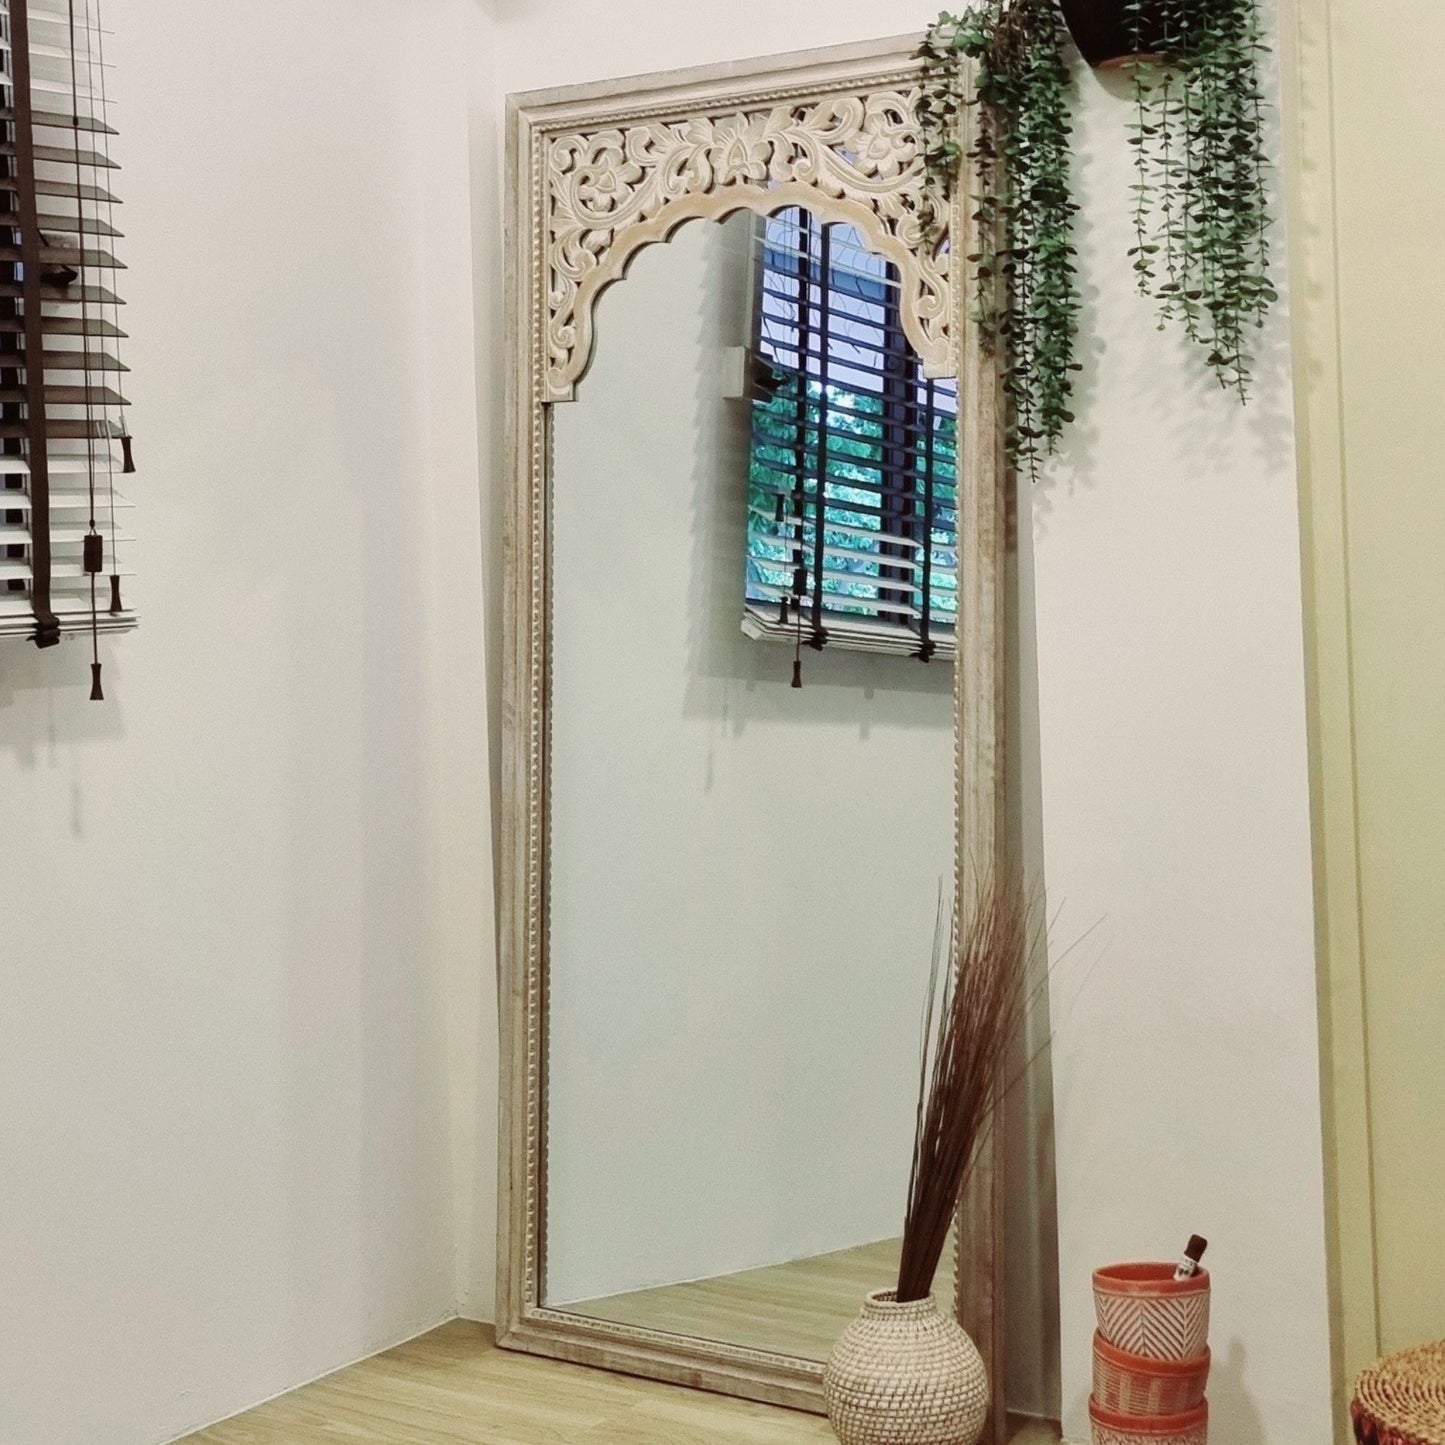 Hand Carved Mirror "Cahaya" in antic wash - 180 cm